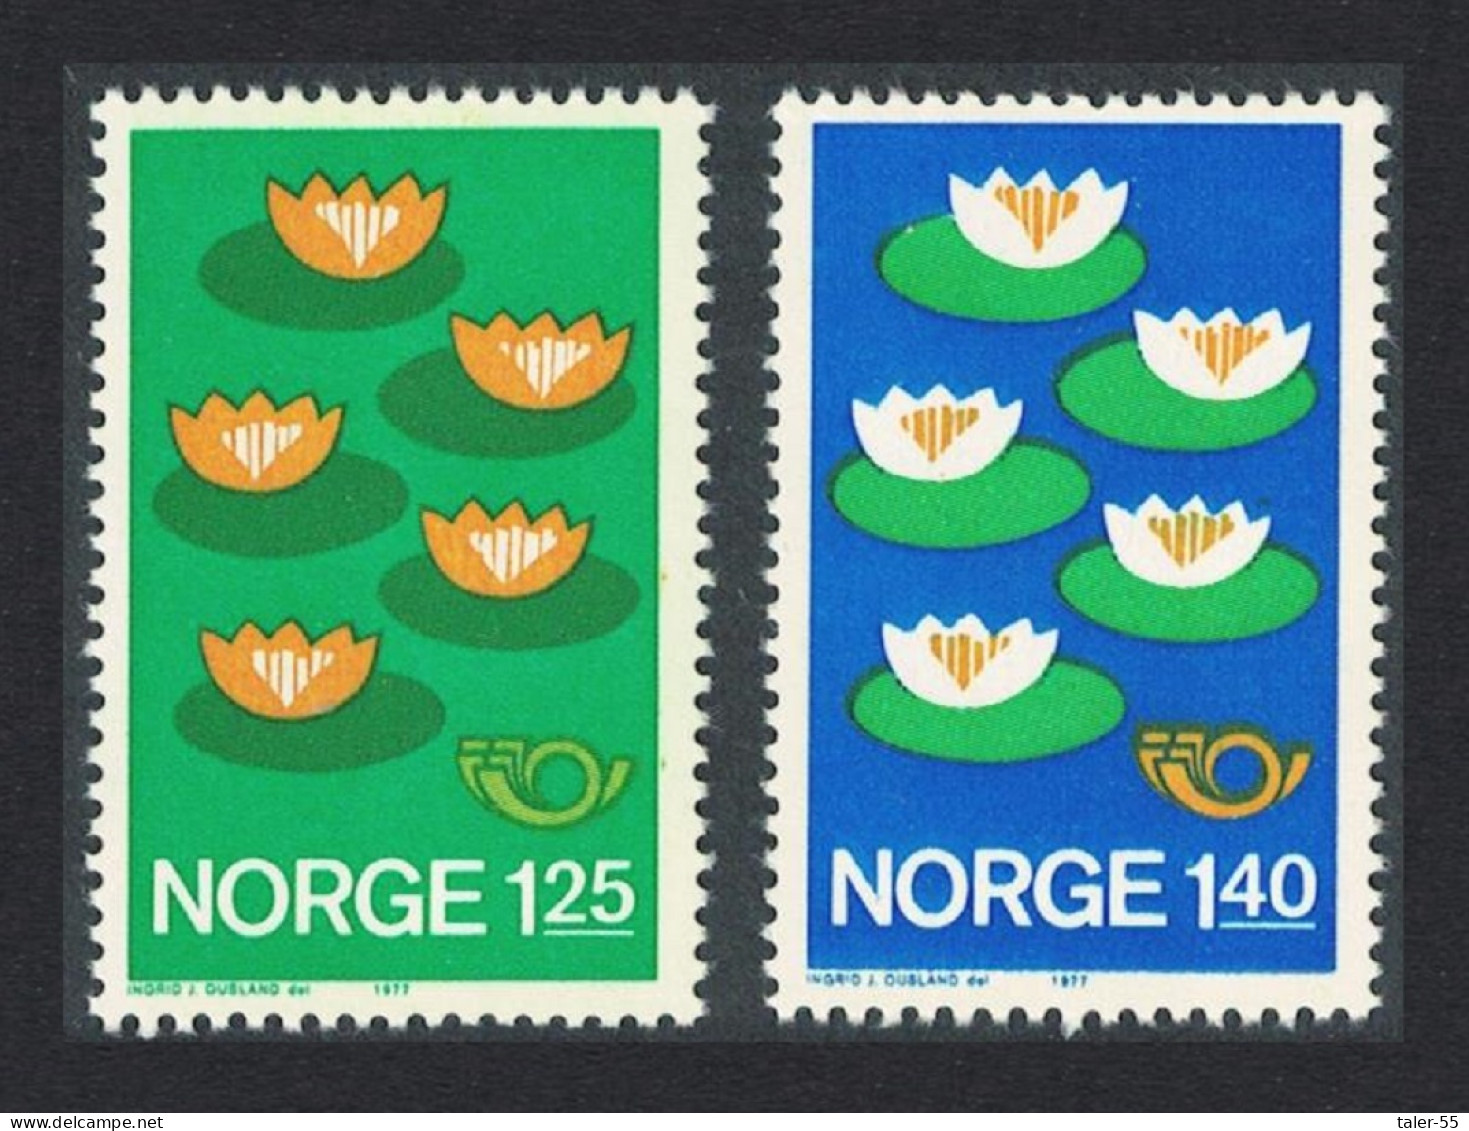 Norway Lotus Flower Environment Protection 2v Joint Issue 1977 MNH SG#770-771 MI#737-738 Sc#688-689 - Nuovi